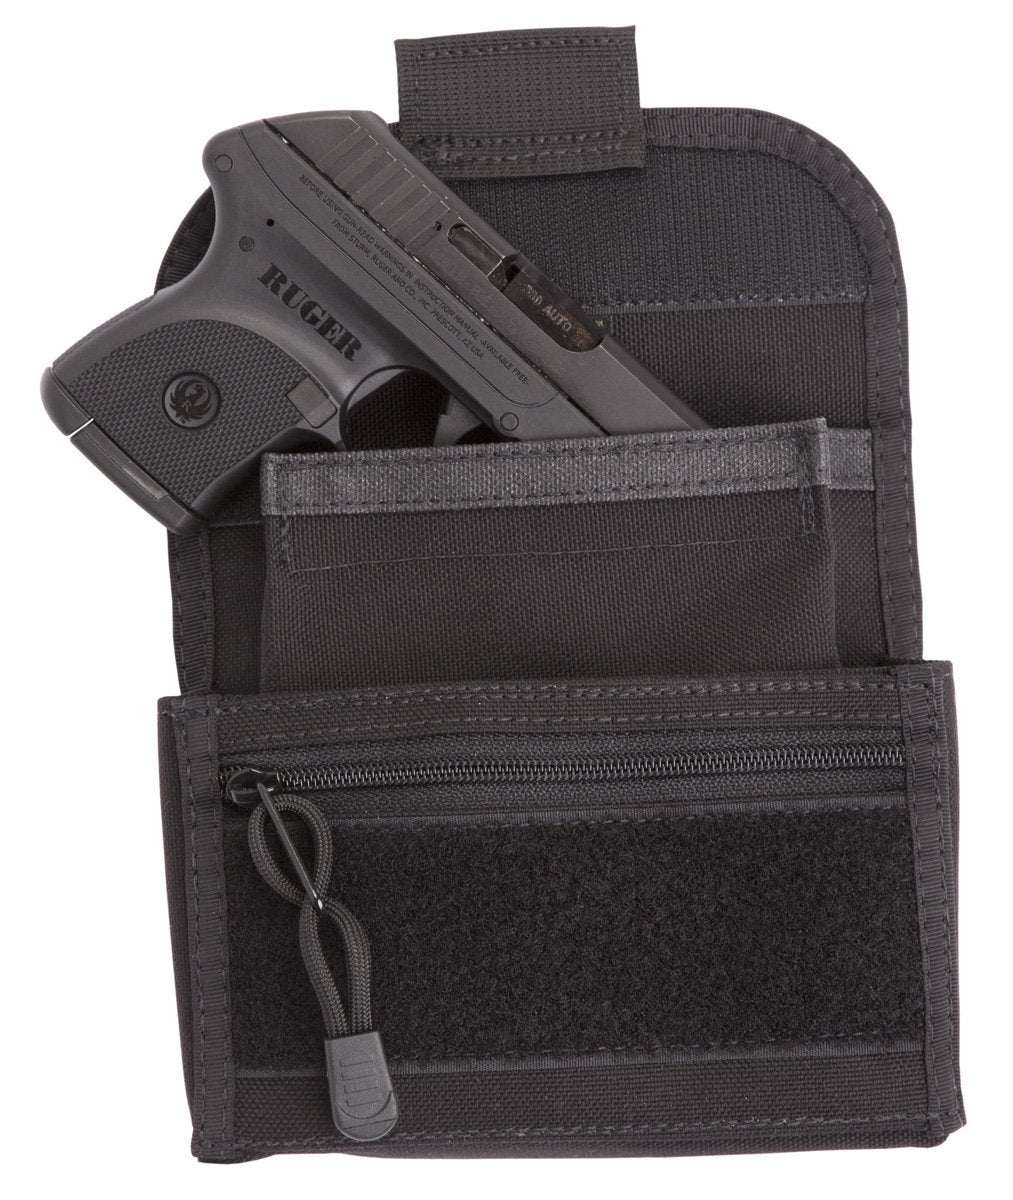  Concealed Carry Gun Pouch